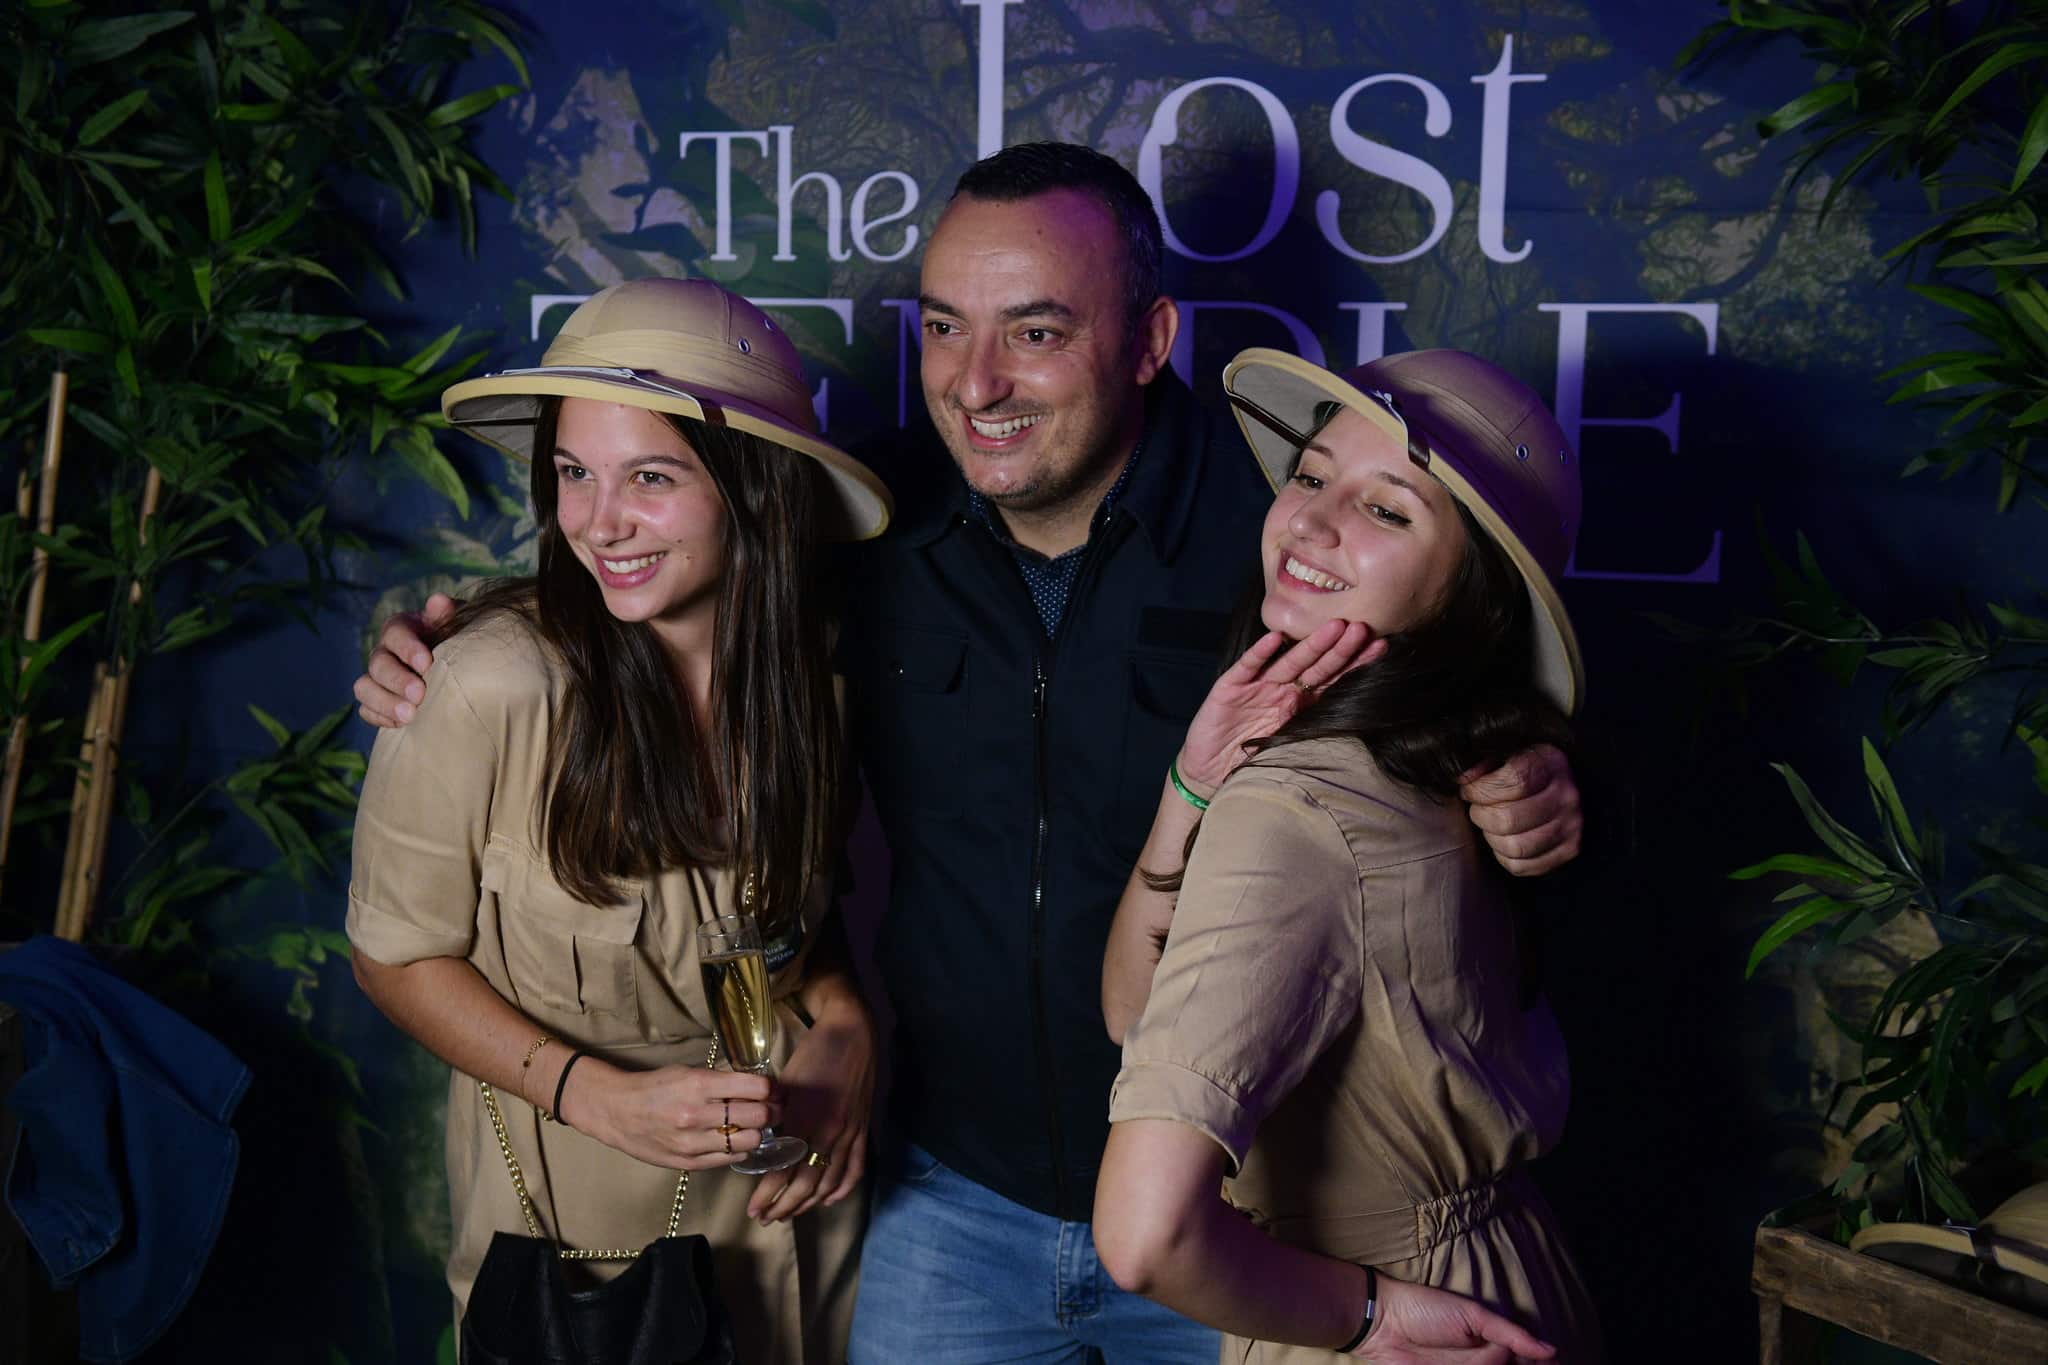 musee bourdelle photocall agence wato evenementiel soiree vp une nuit au musee theme the lost temple paris (5)